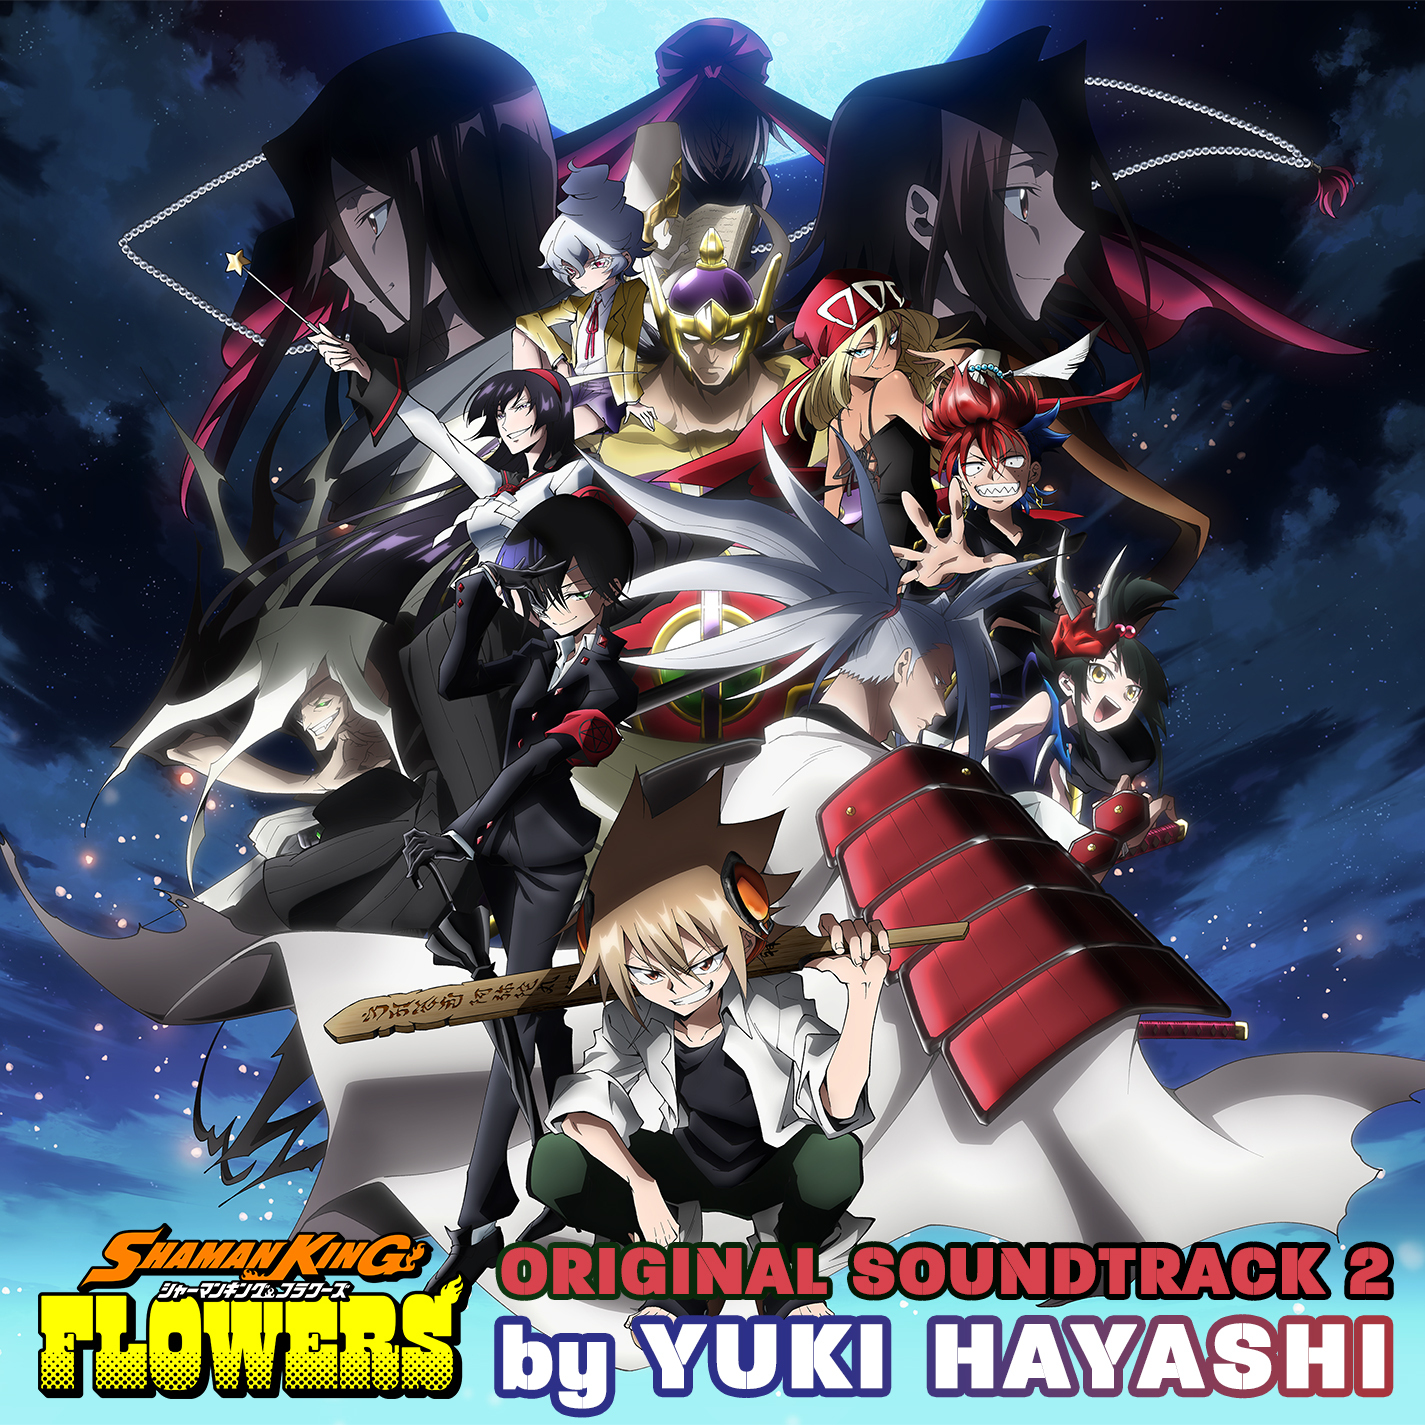 「SHAMAN KING FLOWERS」ORIGINAL SOUNDTRACK VOL.2 is distributed today!